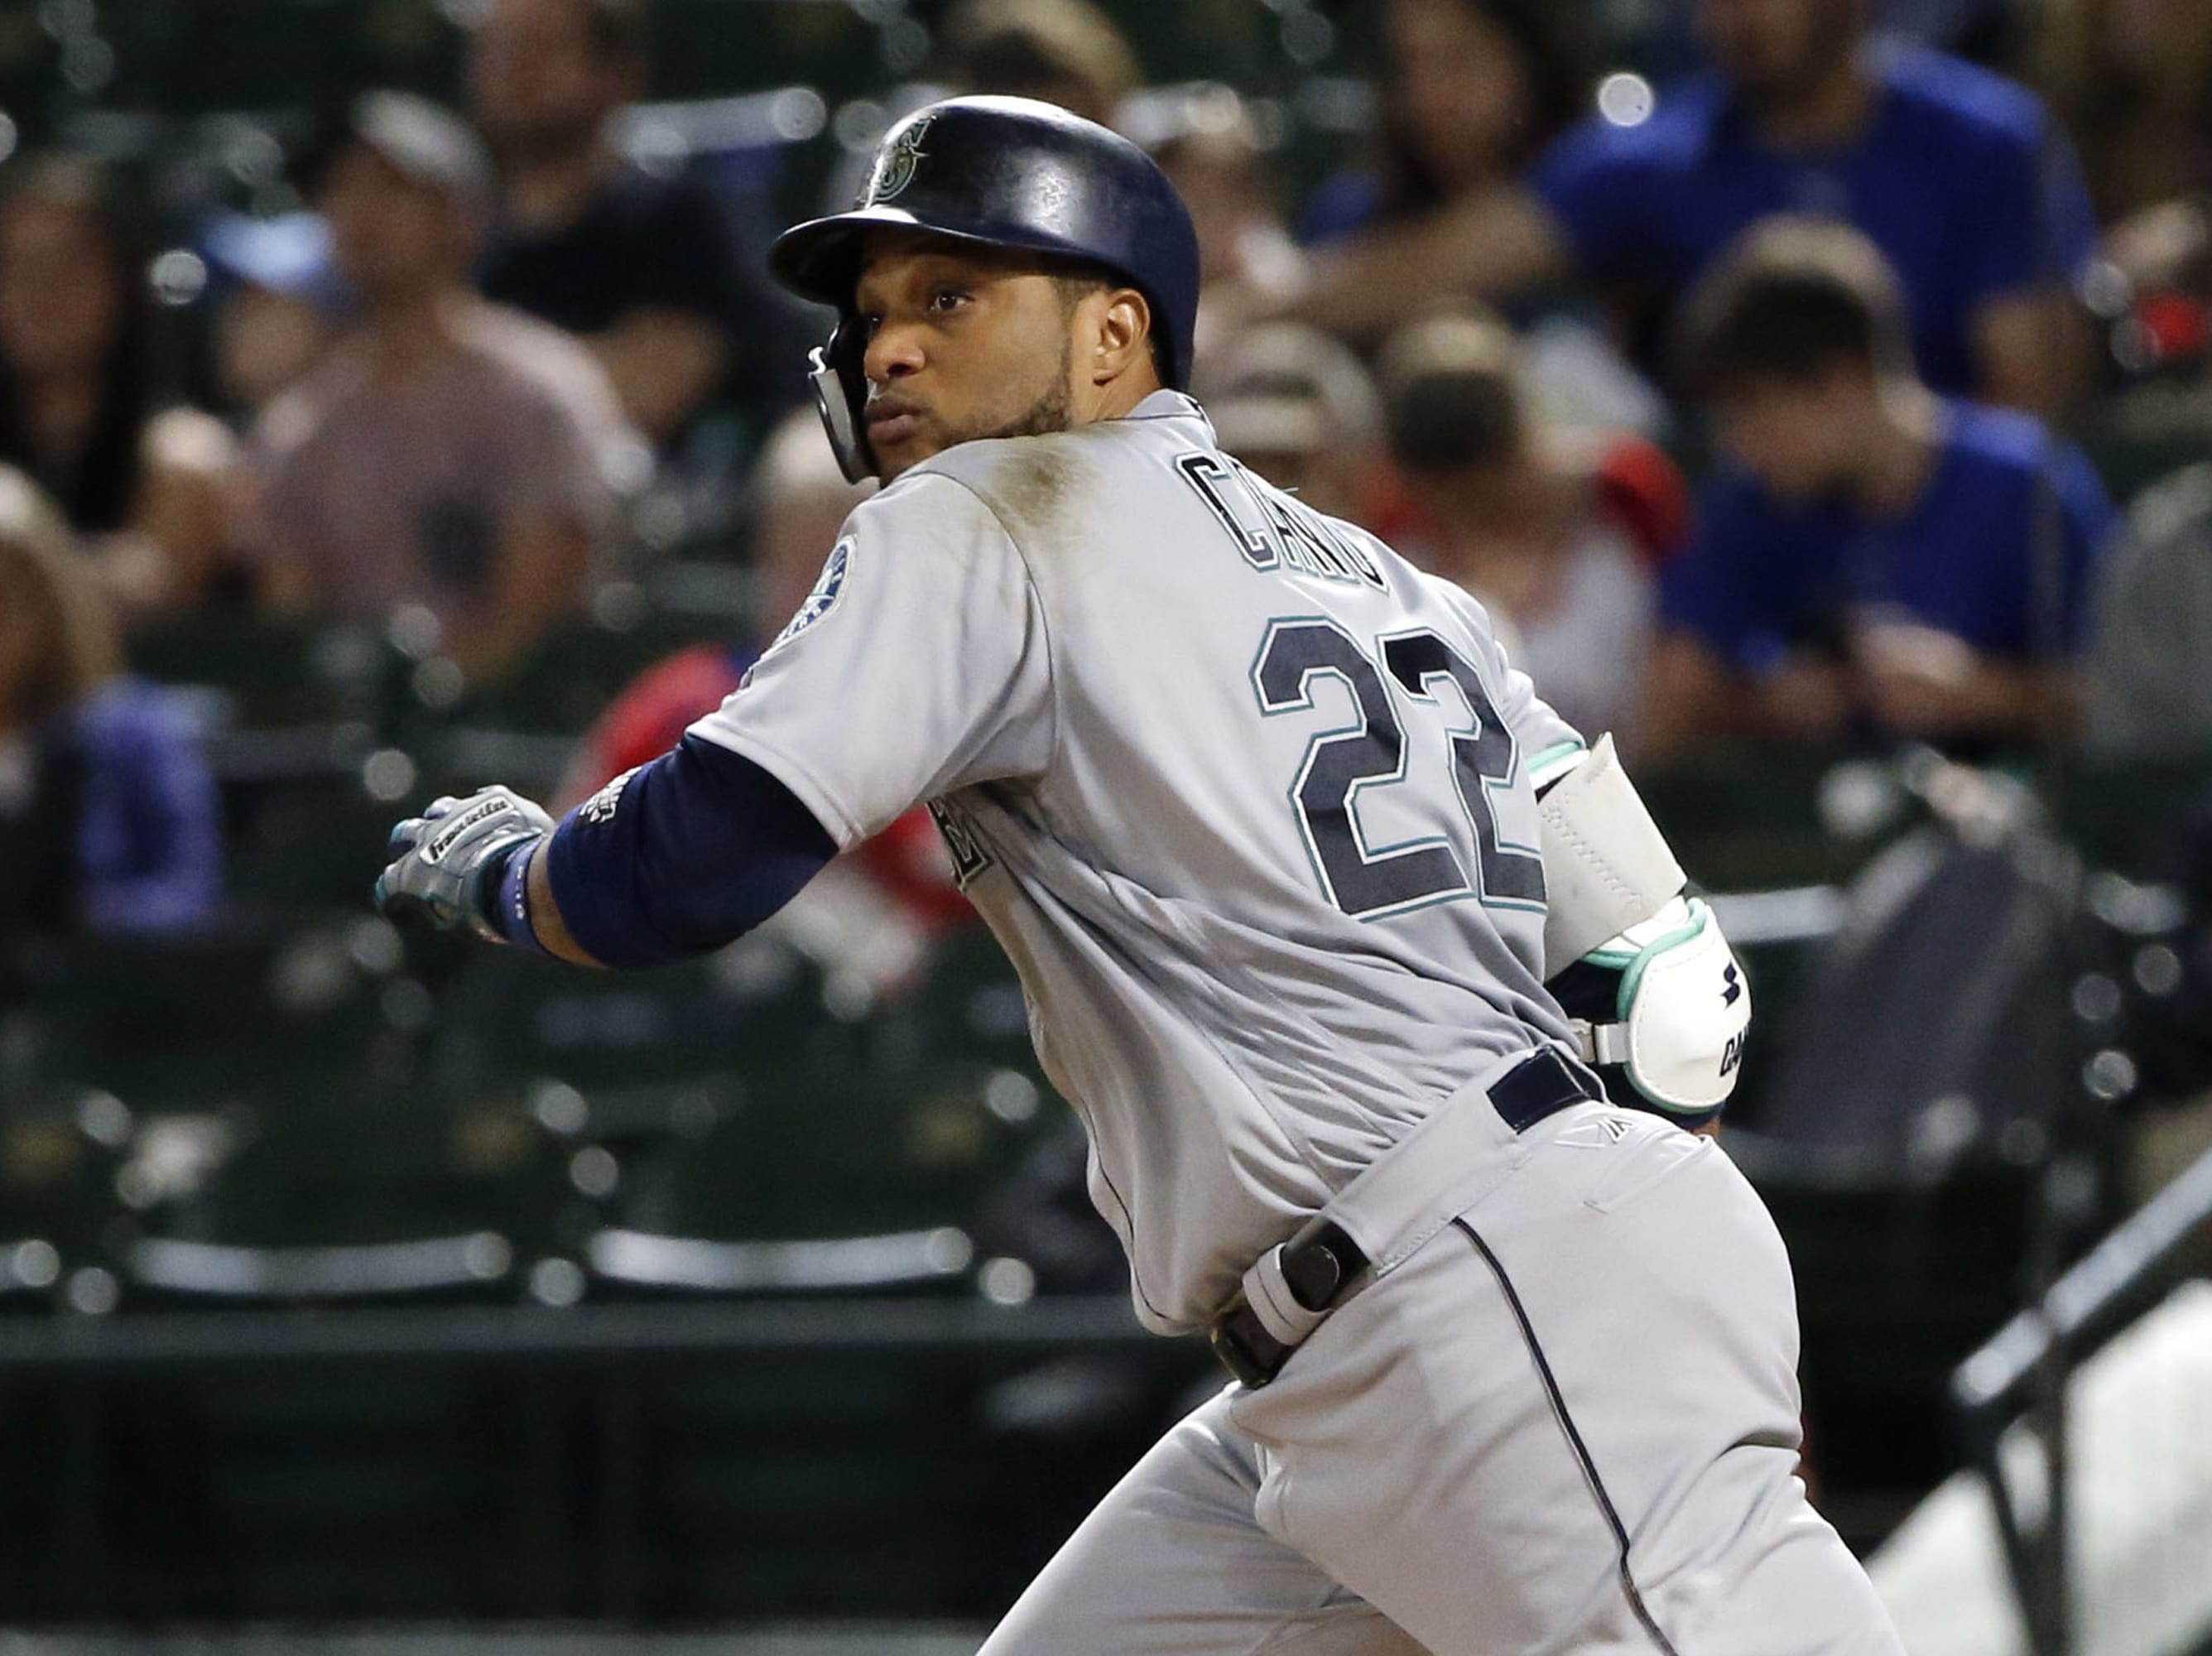 The New York Mets have acquired longtime star second baseman Robinson Cano and major league saves leader Edwin Diaz from the Seattle Mariners in a seven-player trade that was completed on Monday, Dec. 3, 2018.